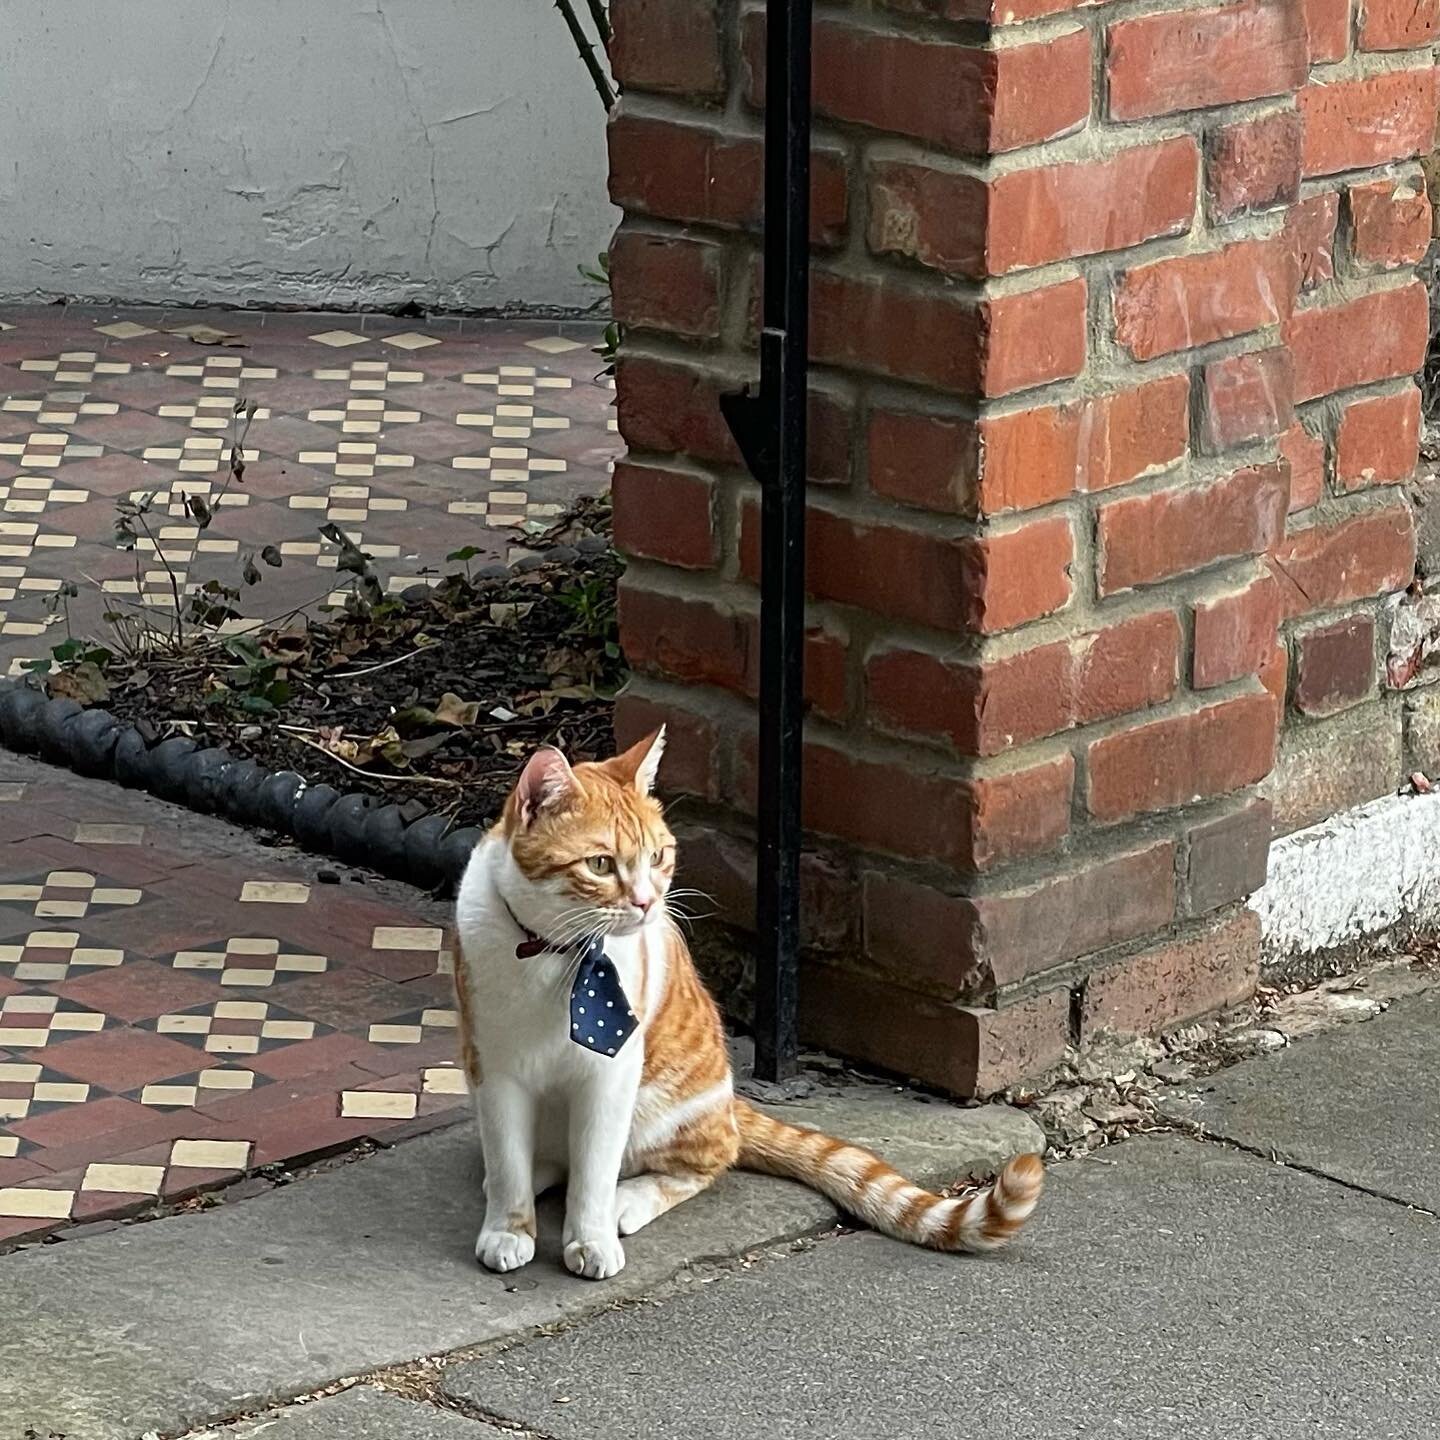 When you spot an extremely dapper &amp; handsome boy while out catsitting 🧡🧡🧡🧡🧡🧡 #londoncatsitter #catsitter #westlondonwhiskers #petservices #london #westlondoncatsitter #catsofinstagram #cats #gatto #instapet #catlovers